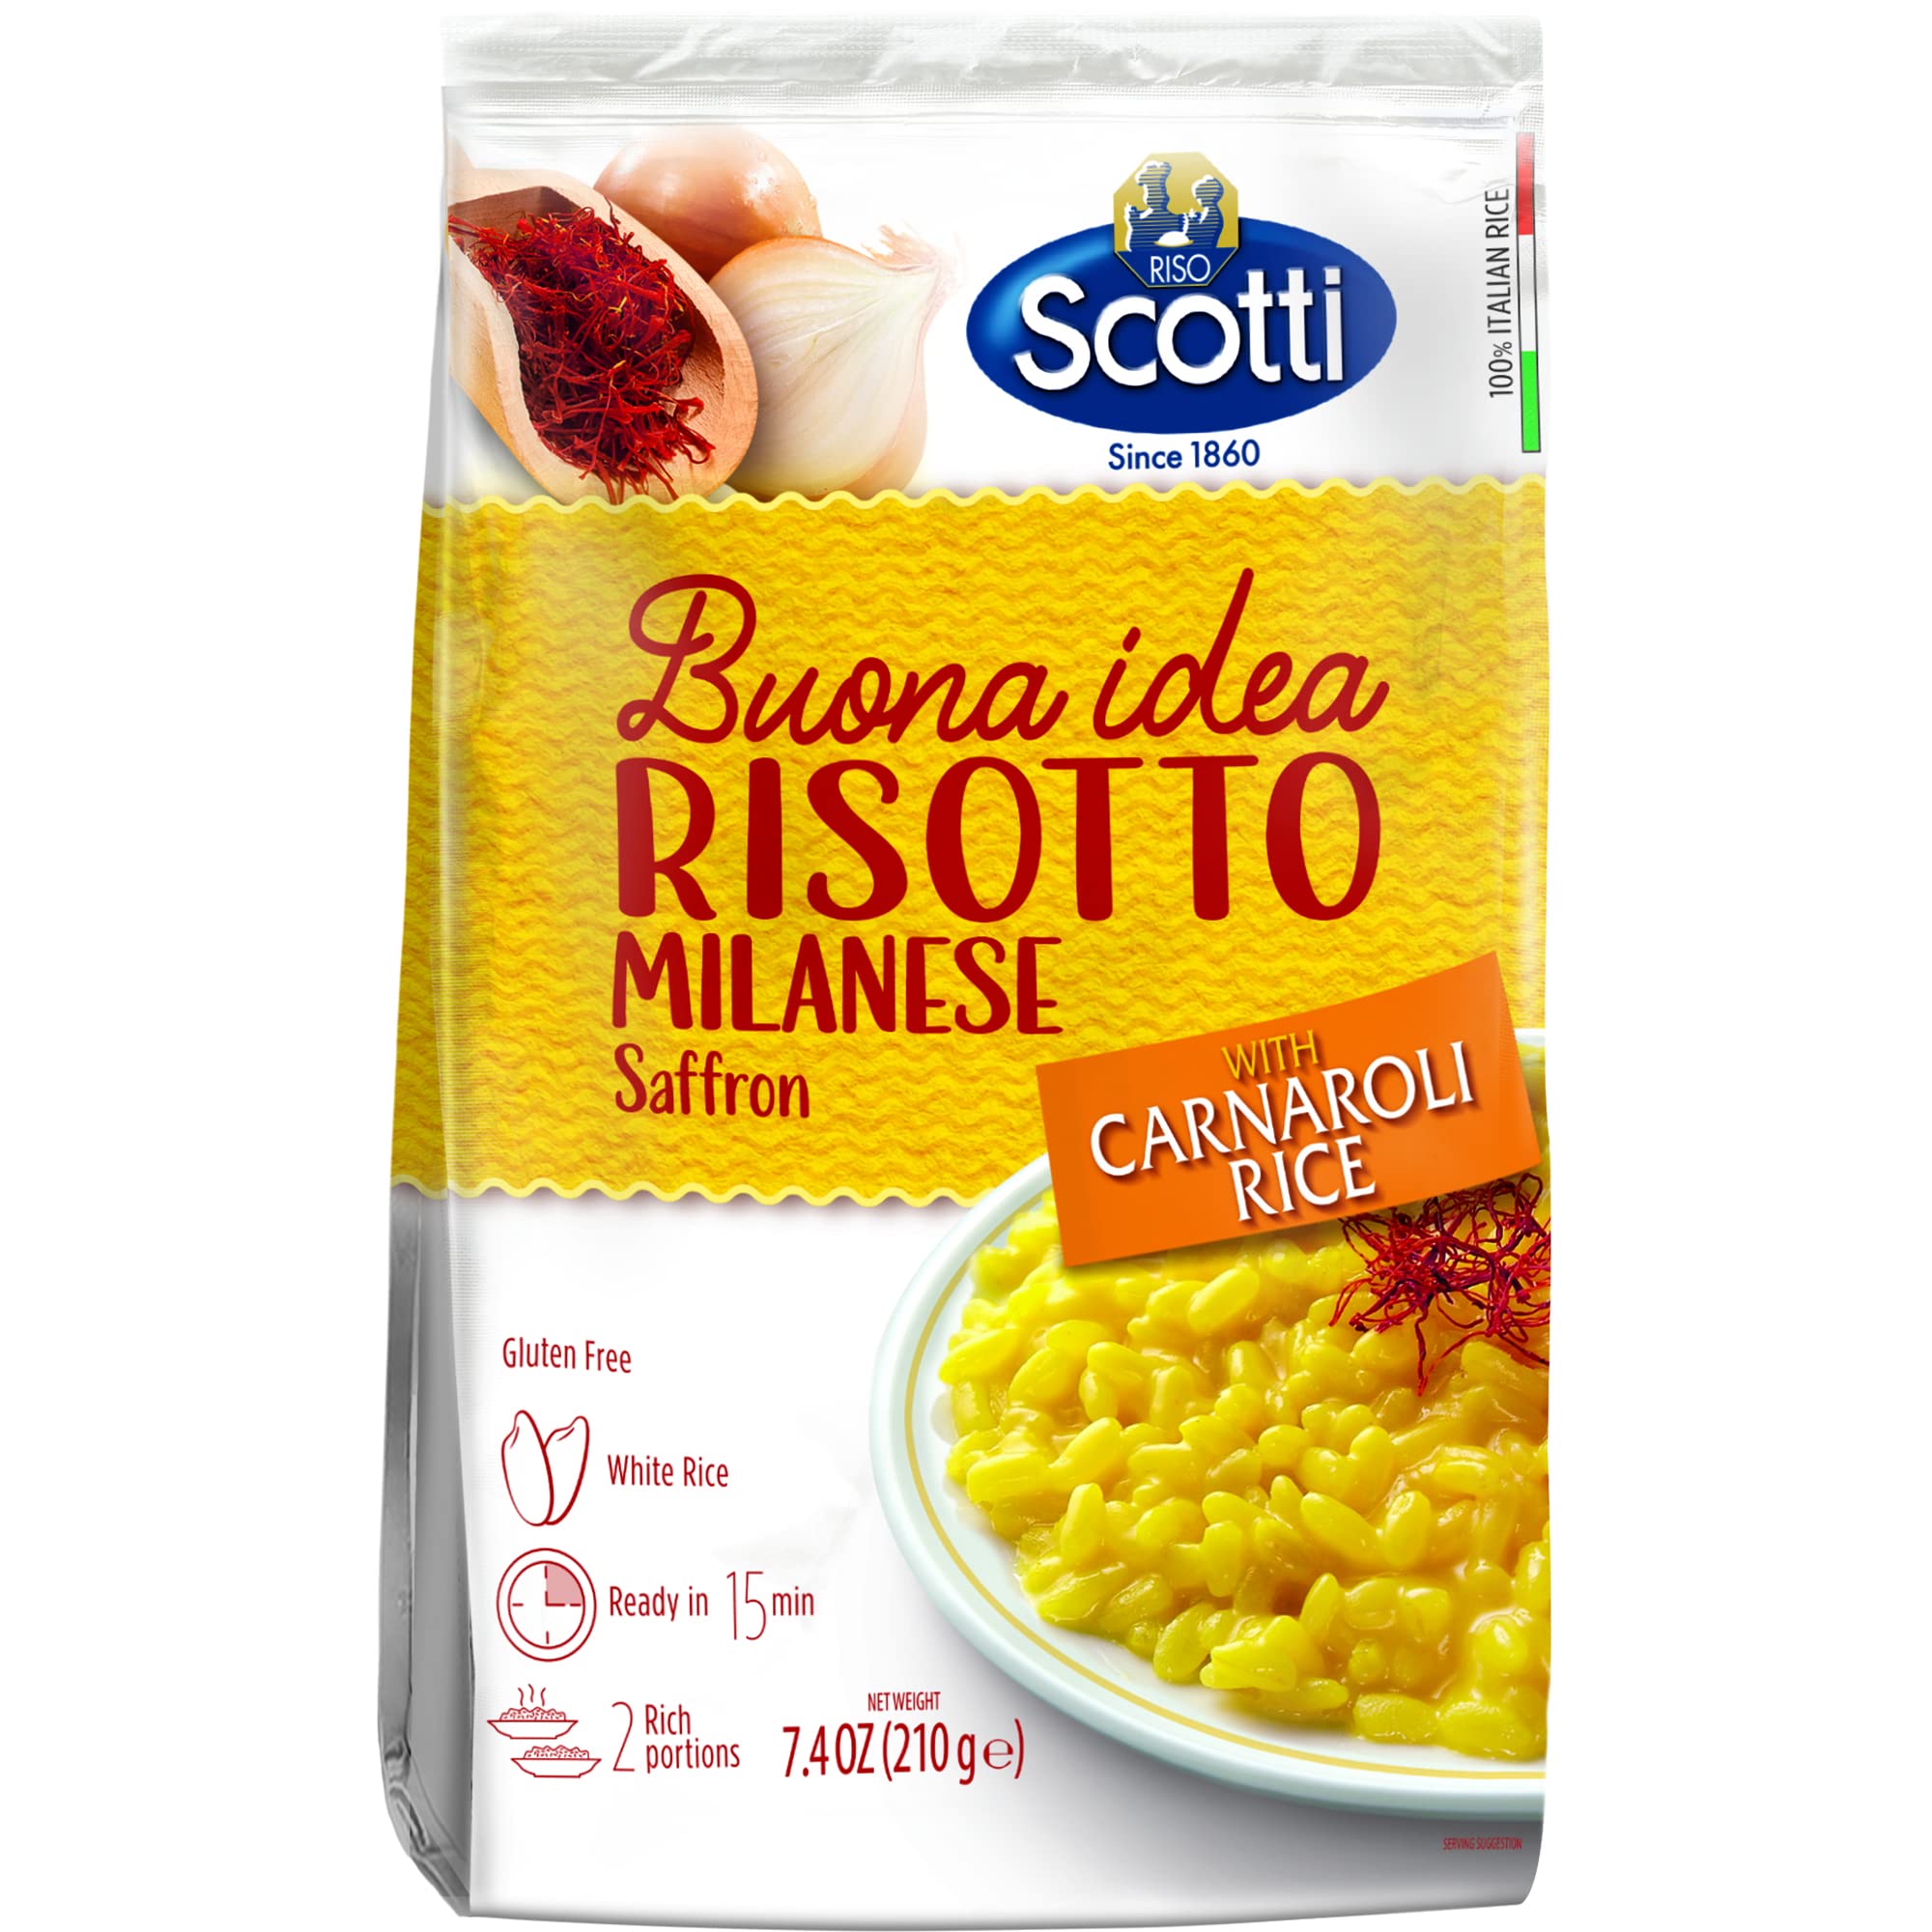 Milanese with Saffron, Riso Scotti, Carnaroli Rice, Easy to Cook, Italian  Risotto, Just add water, Includes Instructions 7.4 oz, 2-3 servings 